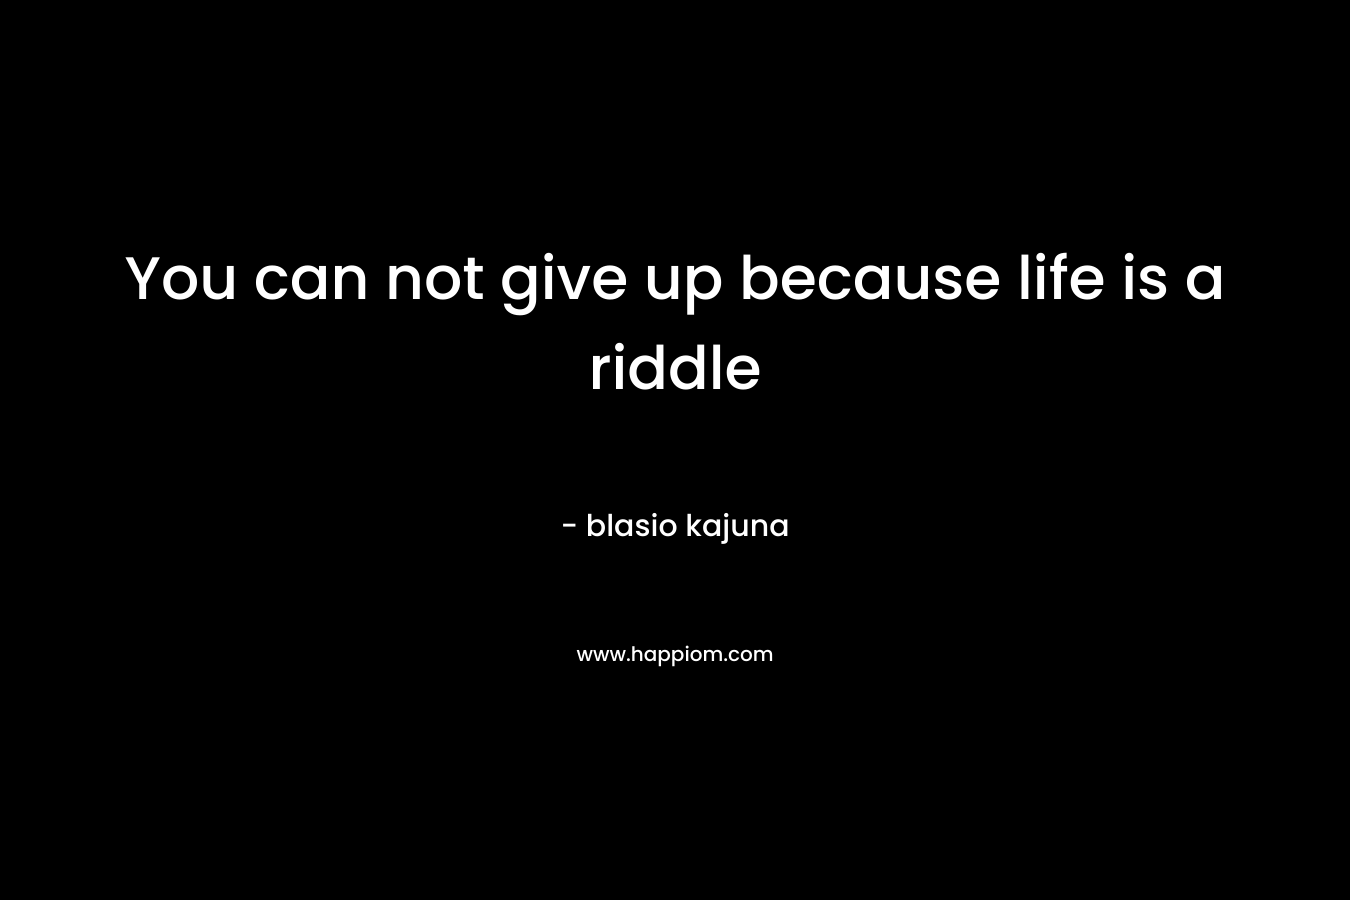 You can not give up because life is a riddle